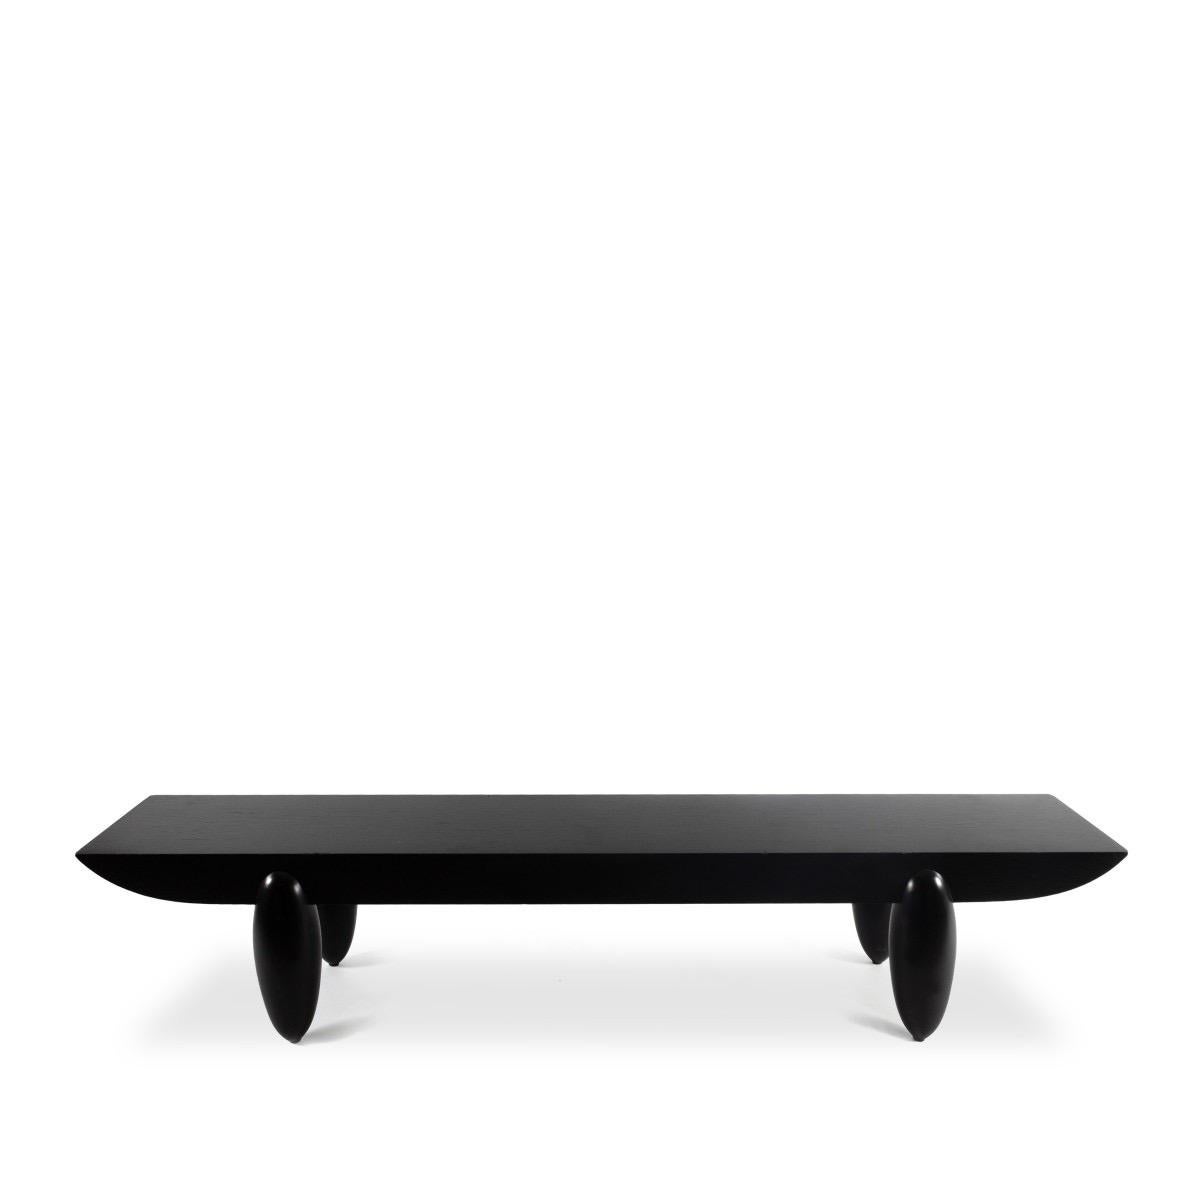 French Christian Liaigre Ebonized Wood Bench / Low Table